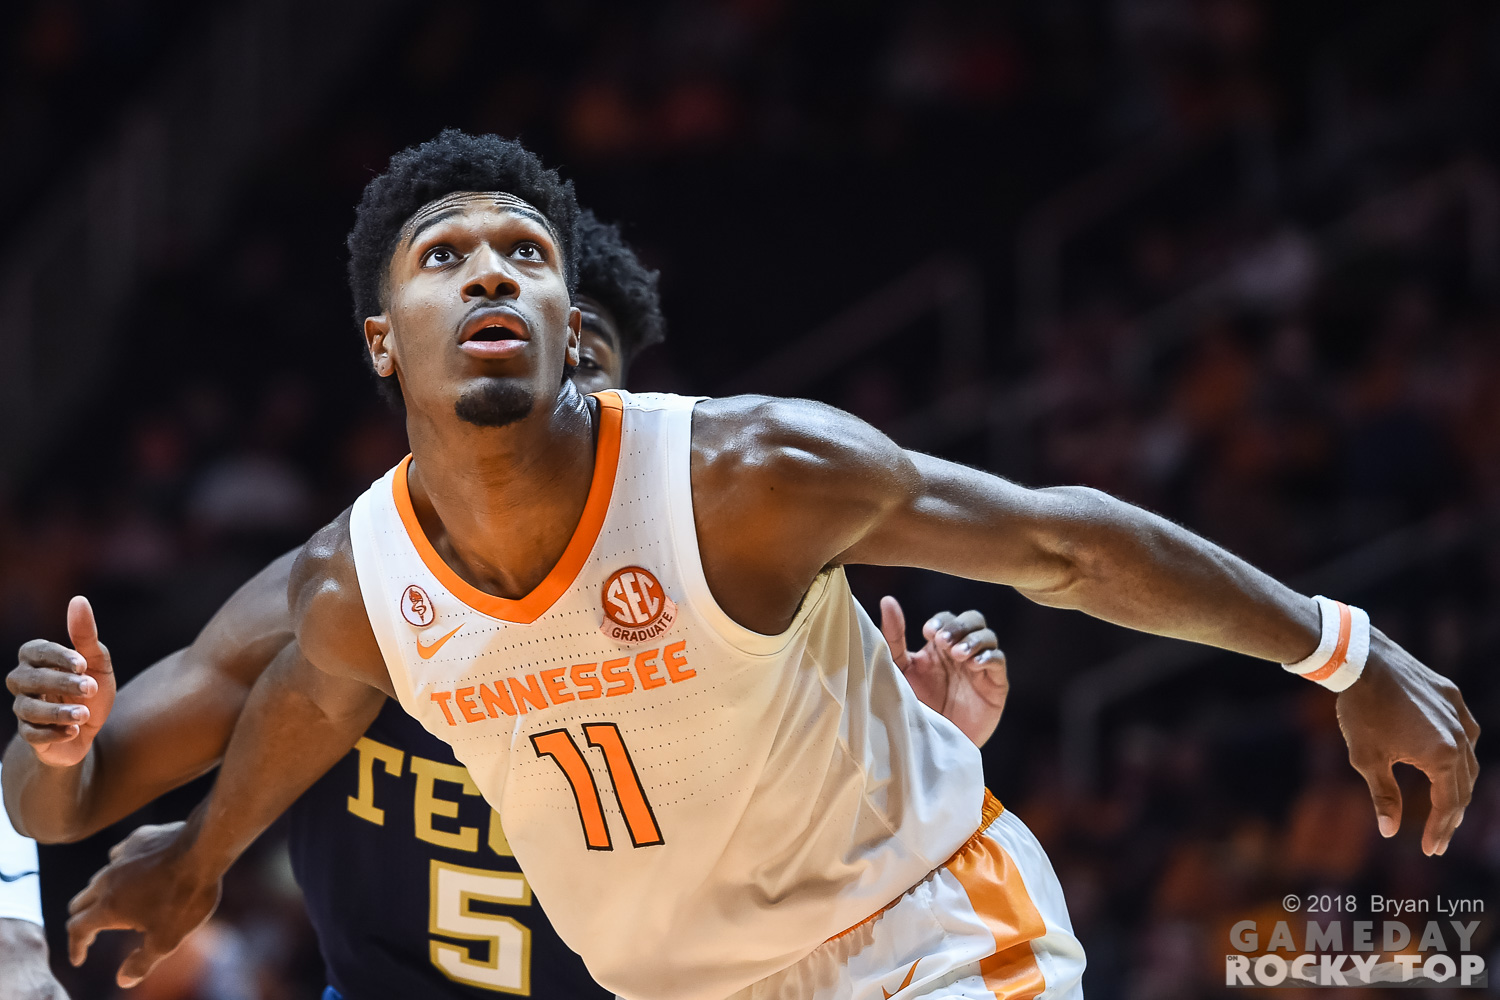 Tennessee-Purdue four-factors preview: GET THE BALL